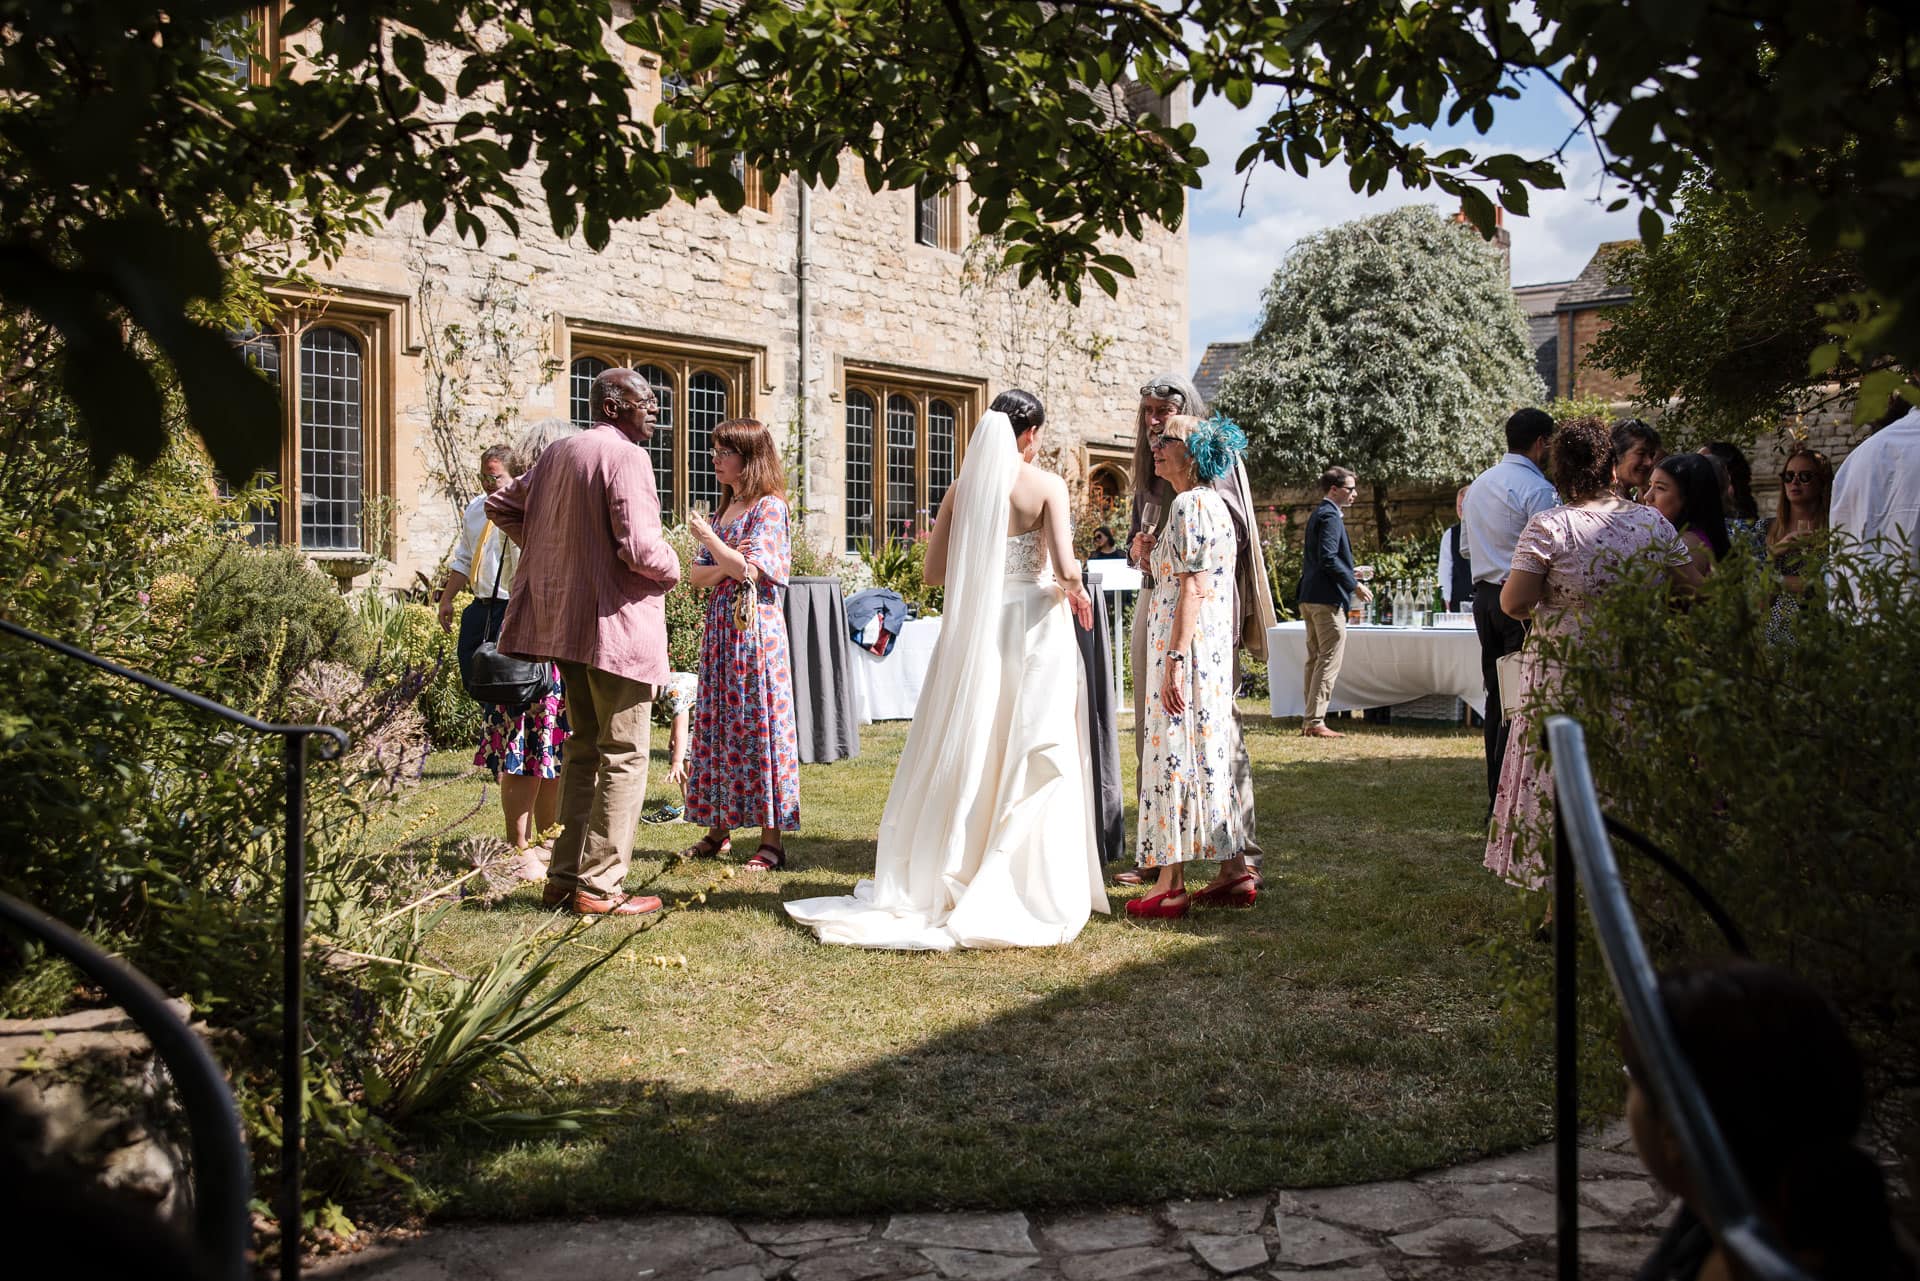 A Wide shot of the wedding guests in the Masters Garden at Pembroke College.